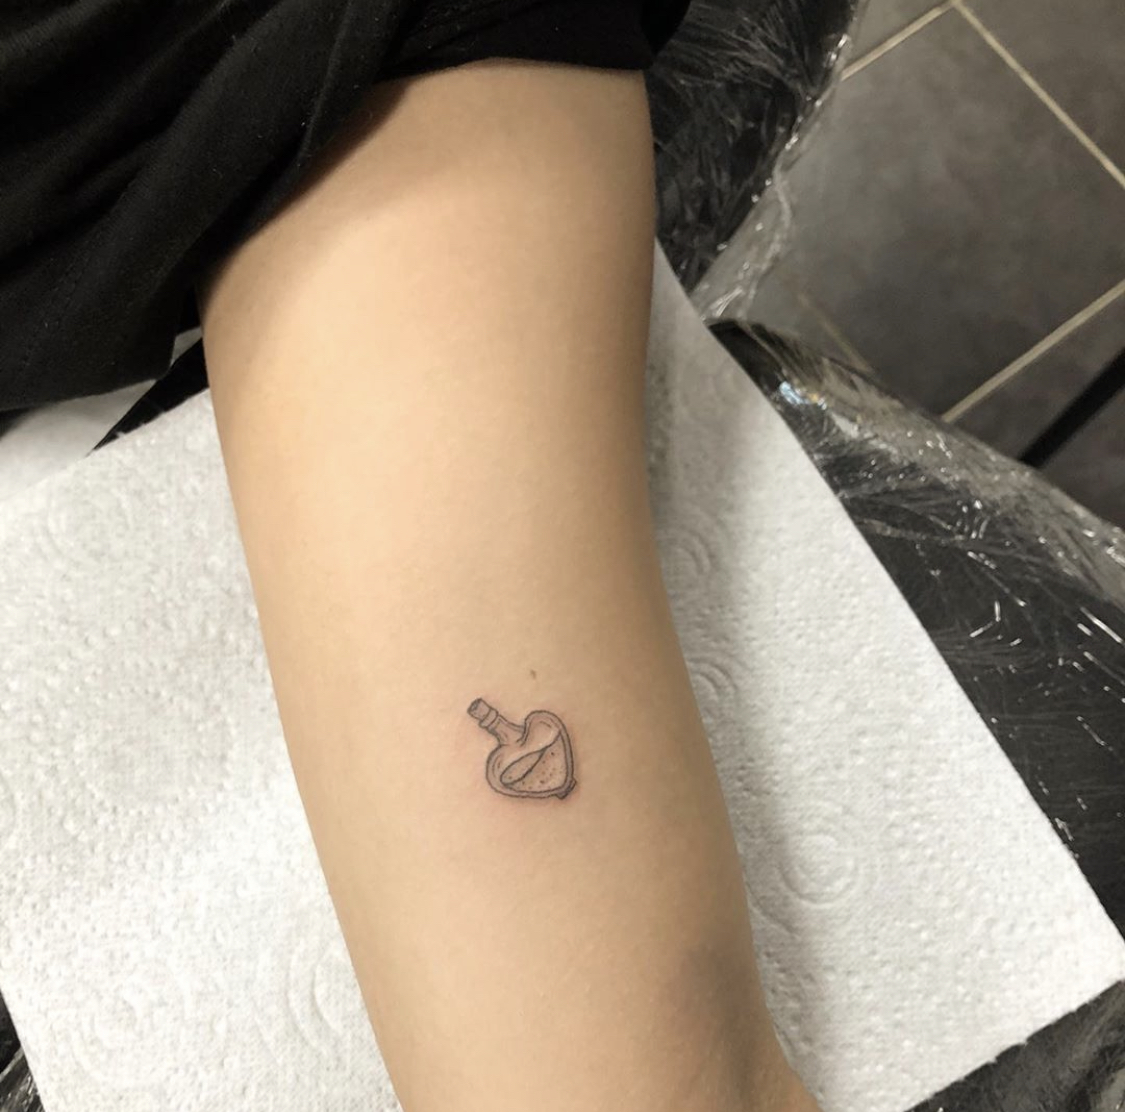 Love Potion SemiPermanent Tattoo Lasts 12 weeks Painless and easy to  apply Organic ink Browse more or create your own  Inkbox   SemiPermanent Tattoos